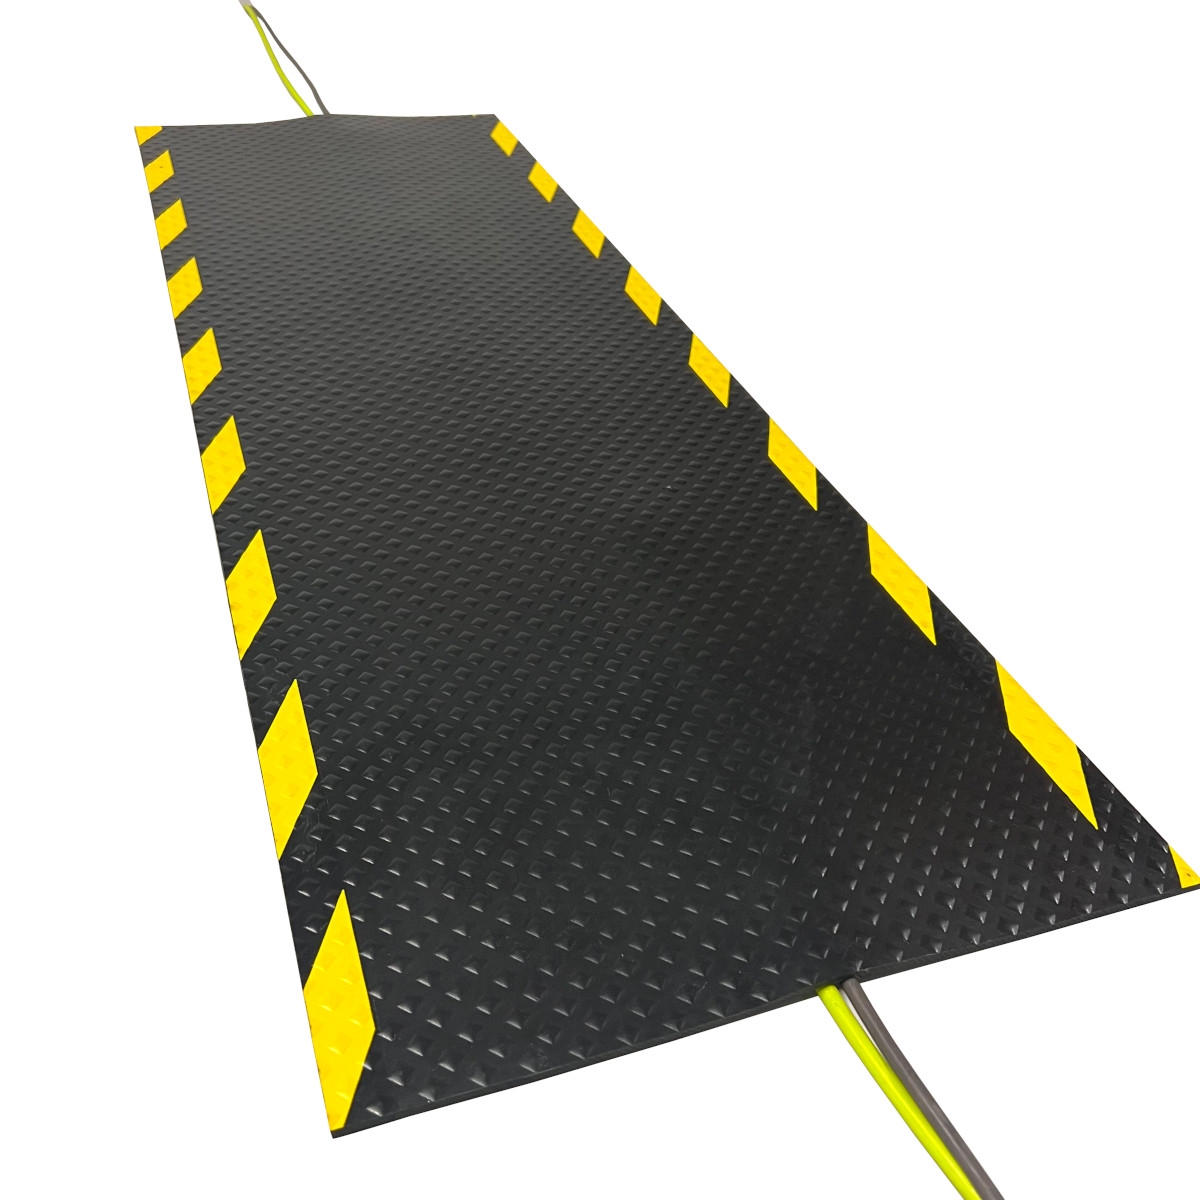 Portifera Protect Rubber – Cable Cover Mat – Office & Commercial Mats – Morland Matting